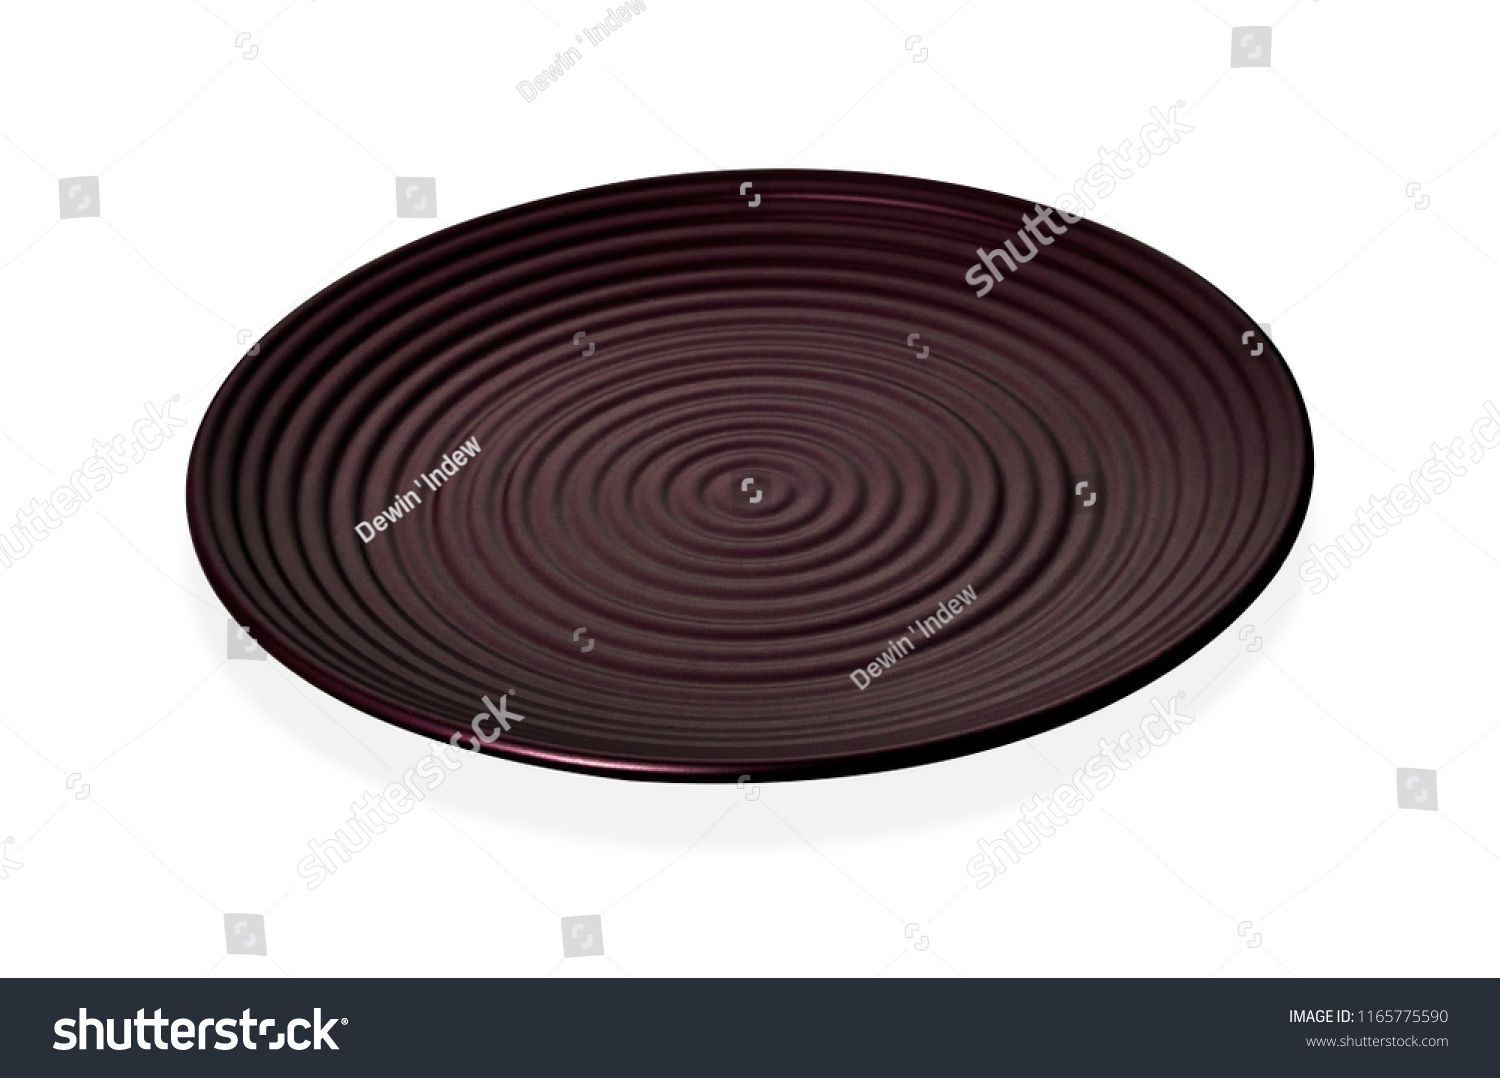 Concentric circles plate, Empty dark red ceramic plate in wavy pattern, isolated on white background with clipping path, Side view                          #1165775590